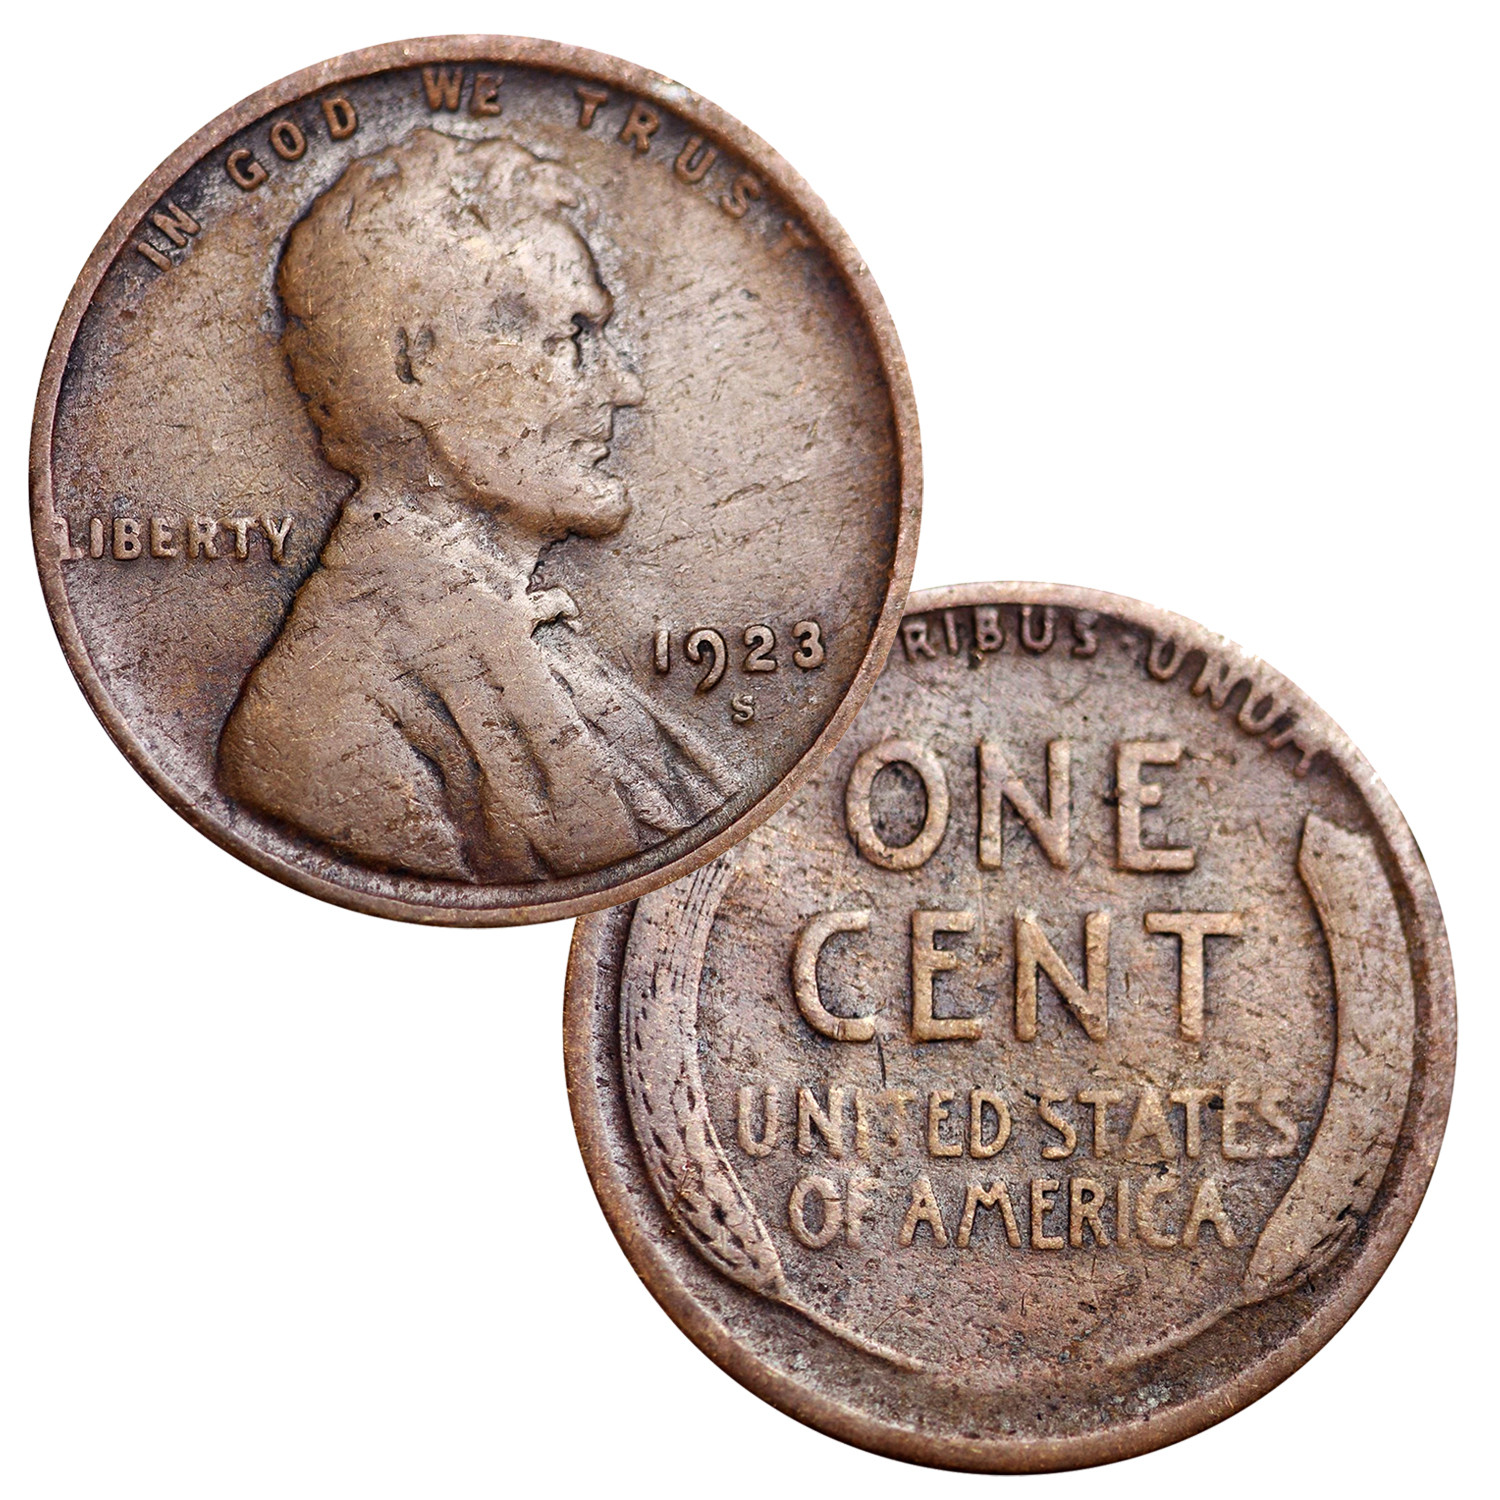 Wheat Cents from the 1920s in Circulated Condition - All coins will ...